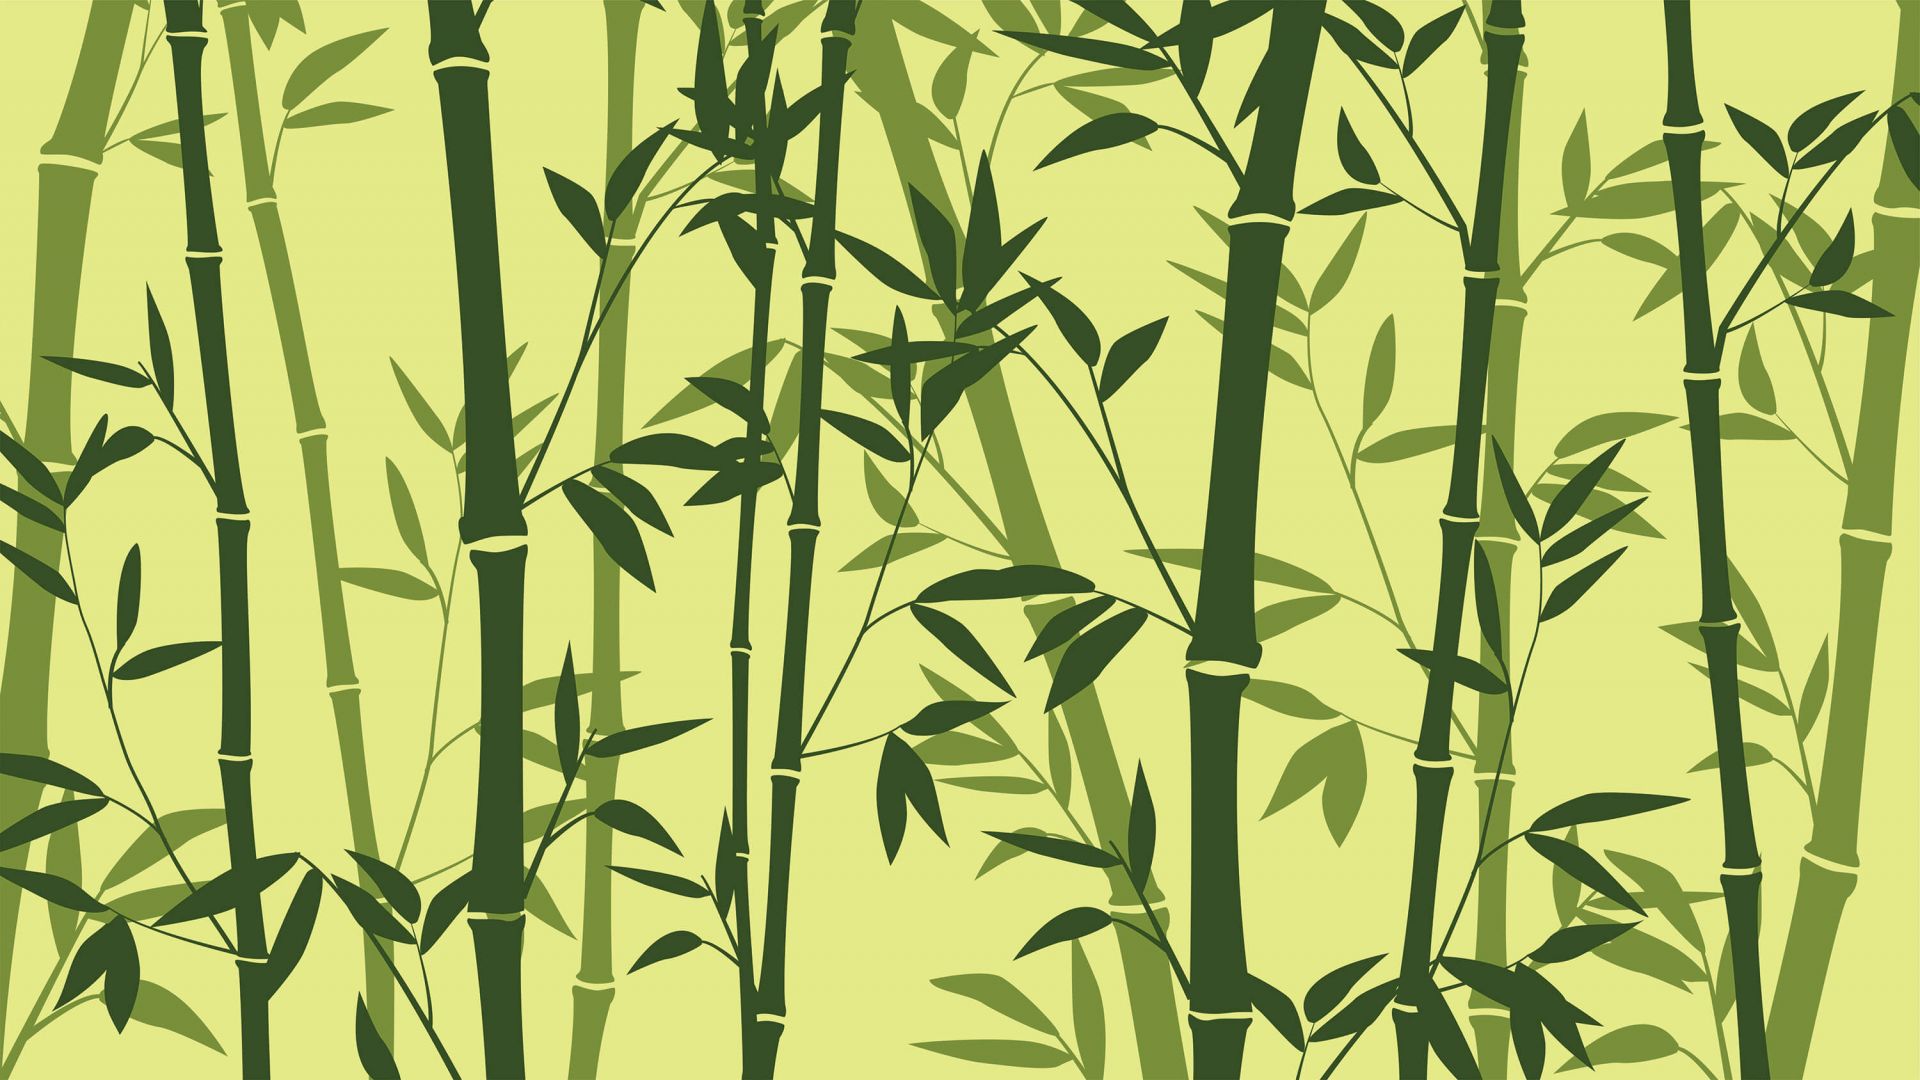 100+] Bamboo Iphone Wallpapers | Wallpapers.com